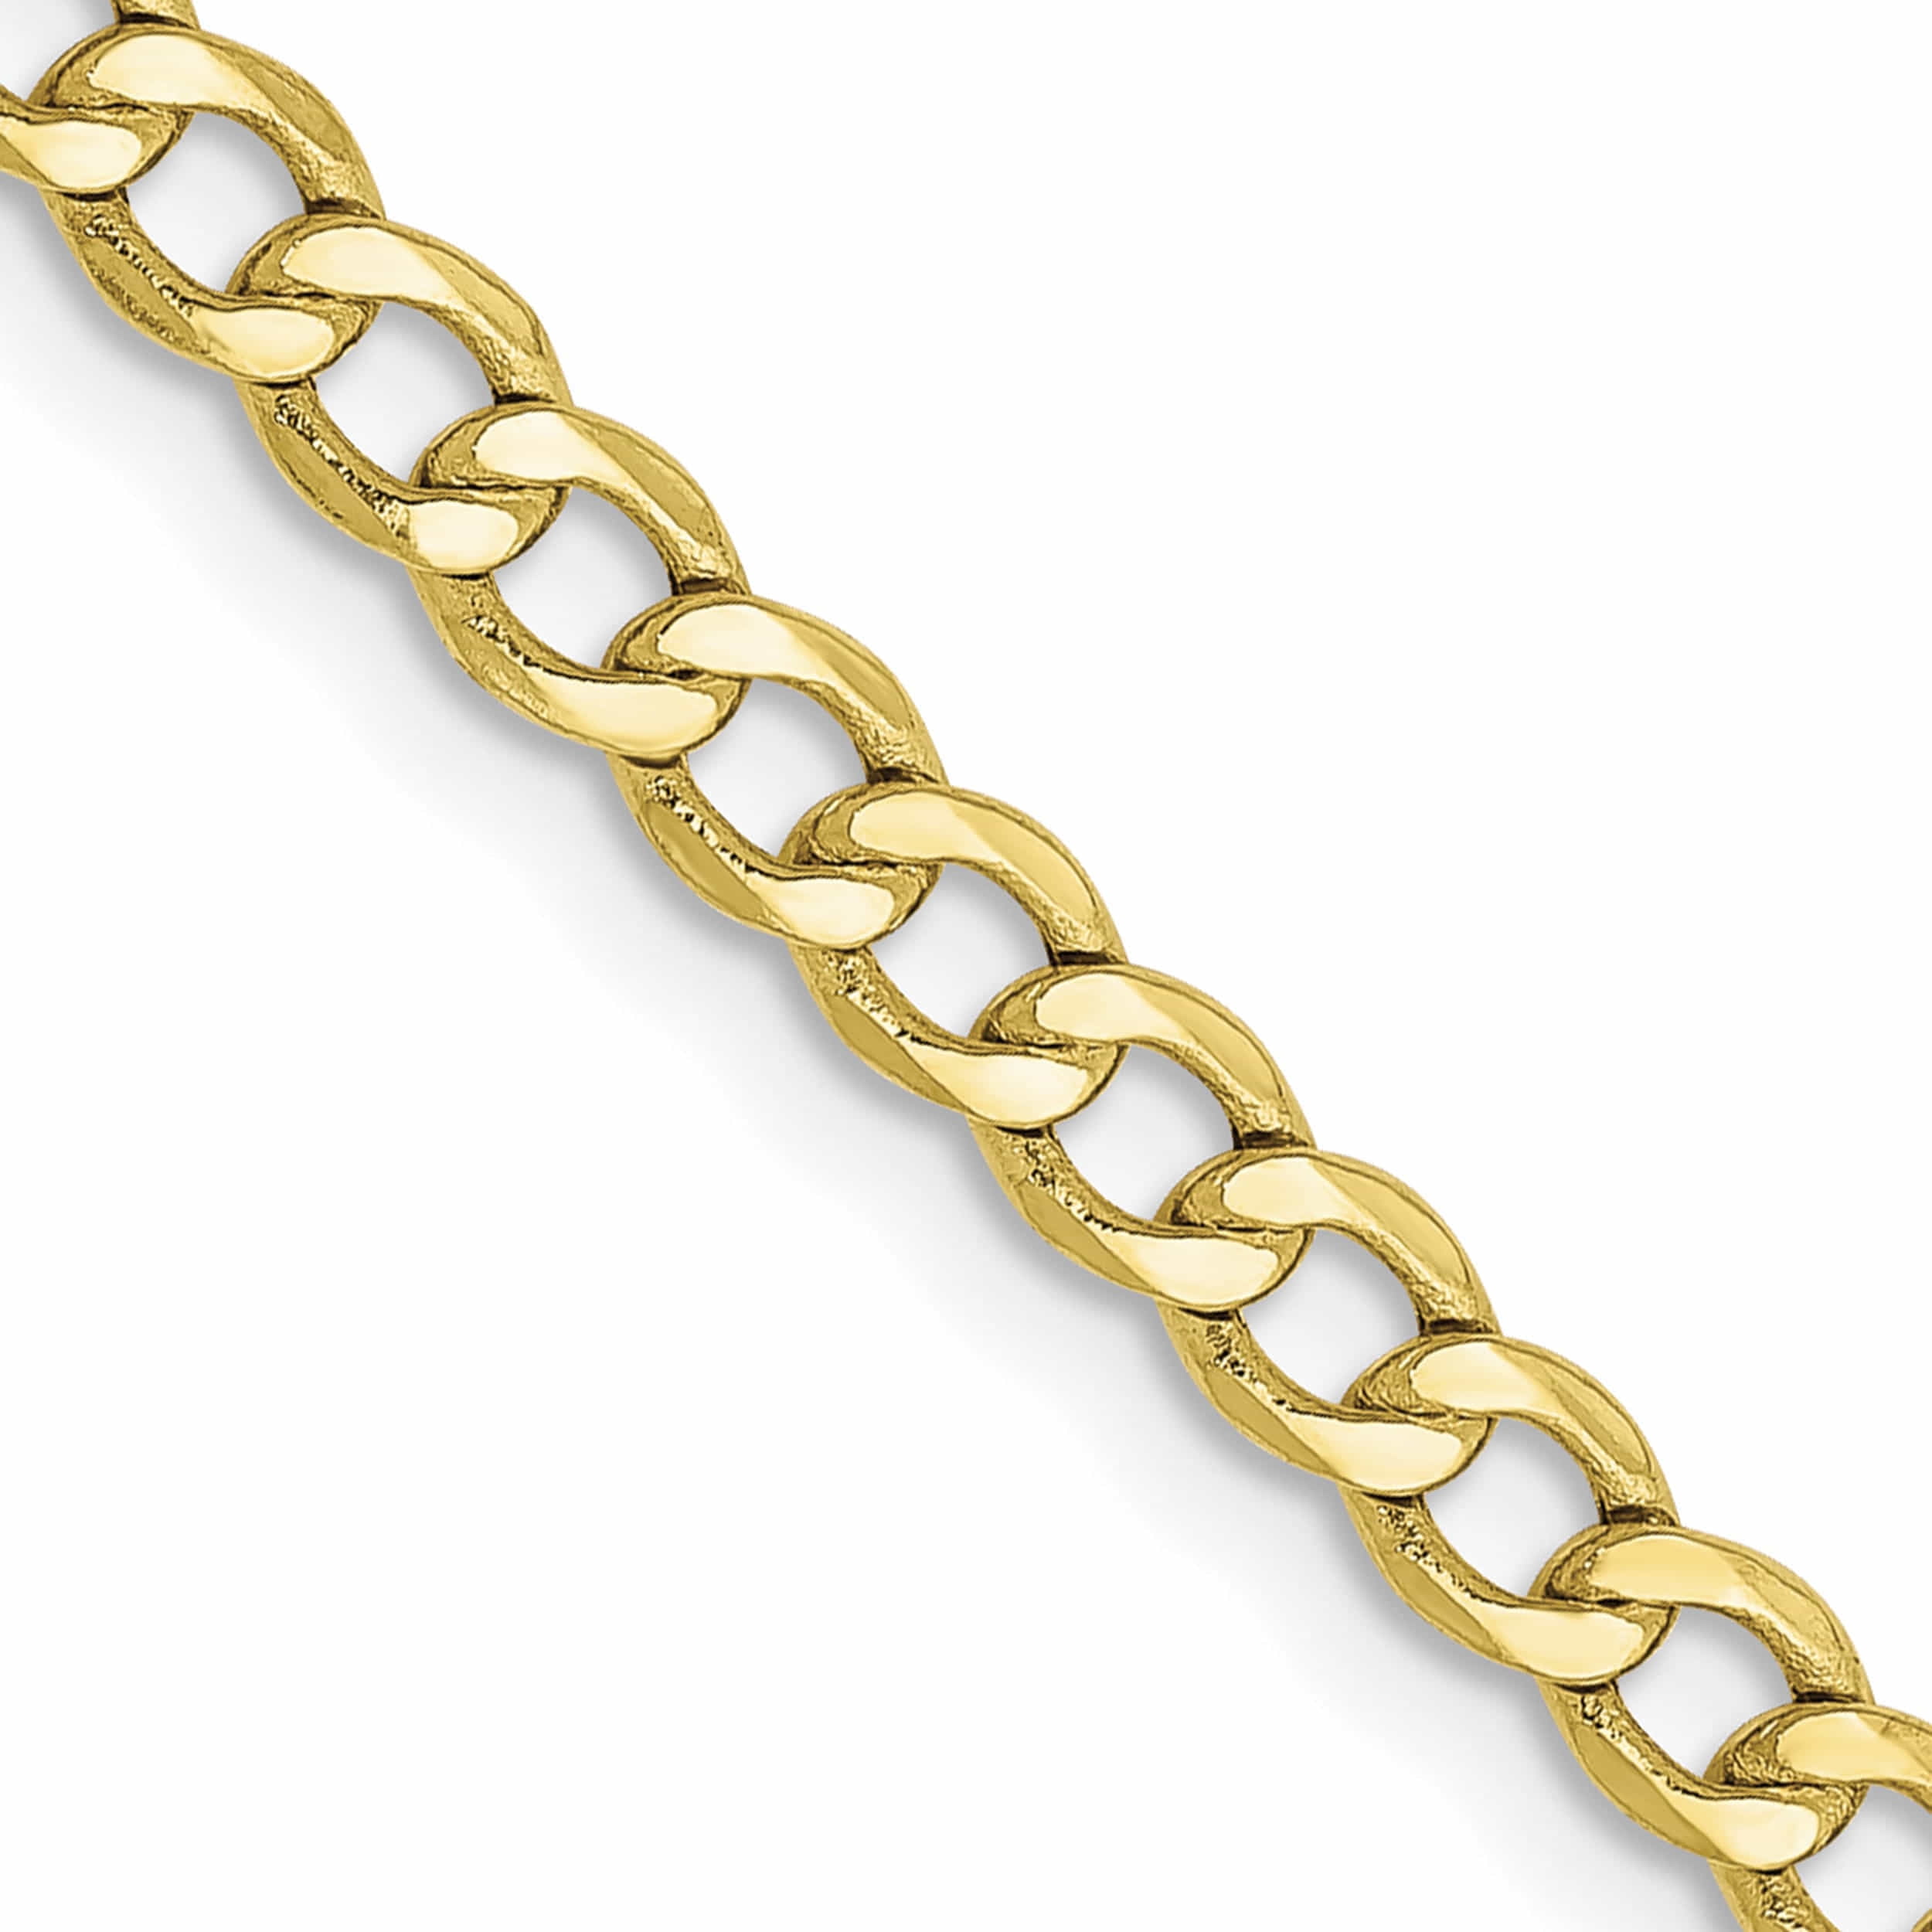 16 18 20 24 Length Options 10k 3.35mm Semi-solid Curb Link Chain Necklace